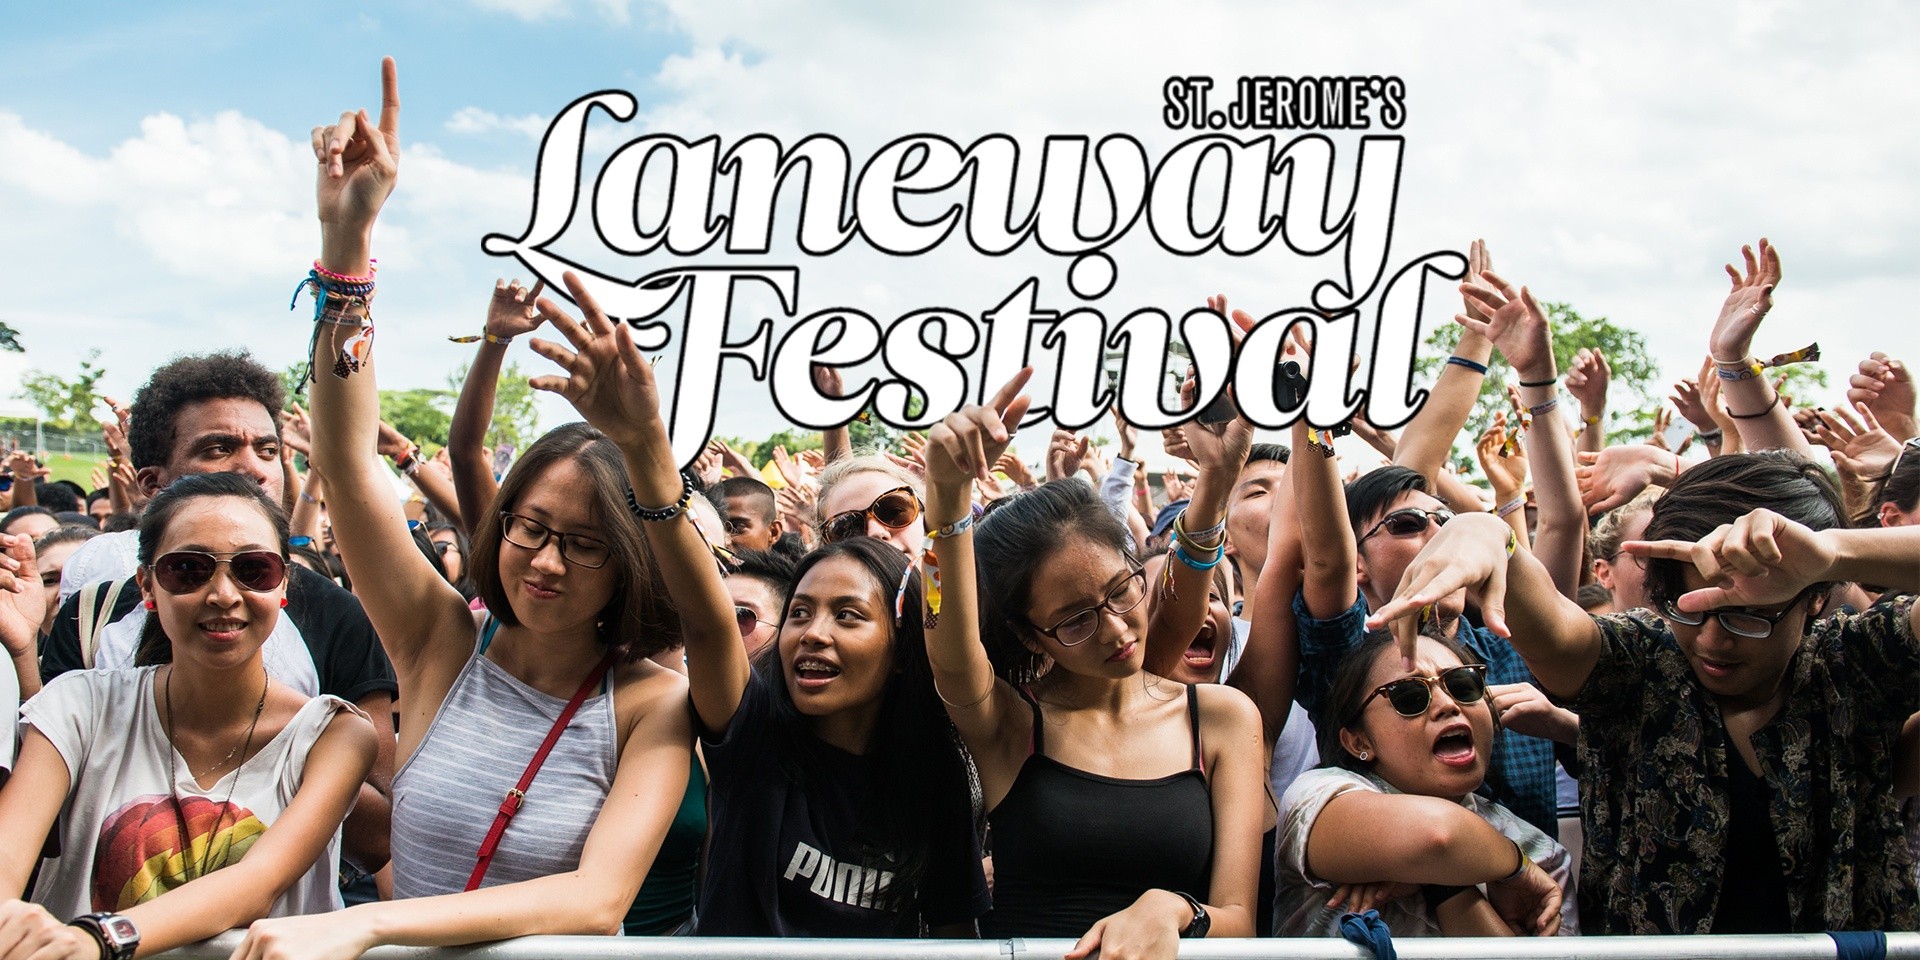 The highs and lows of Laneway Festival Singapore 2016